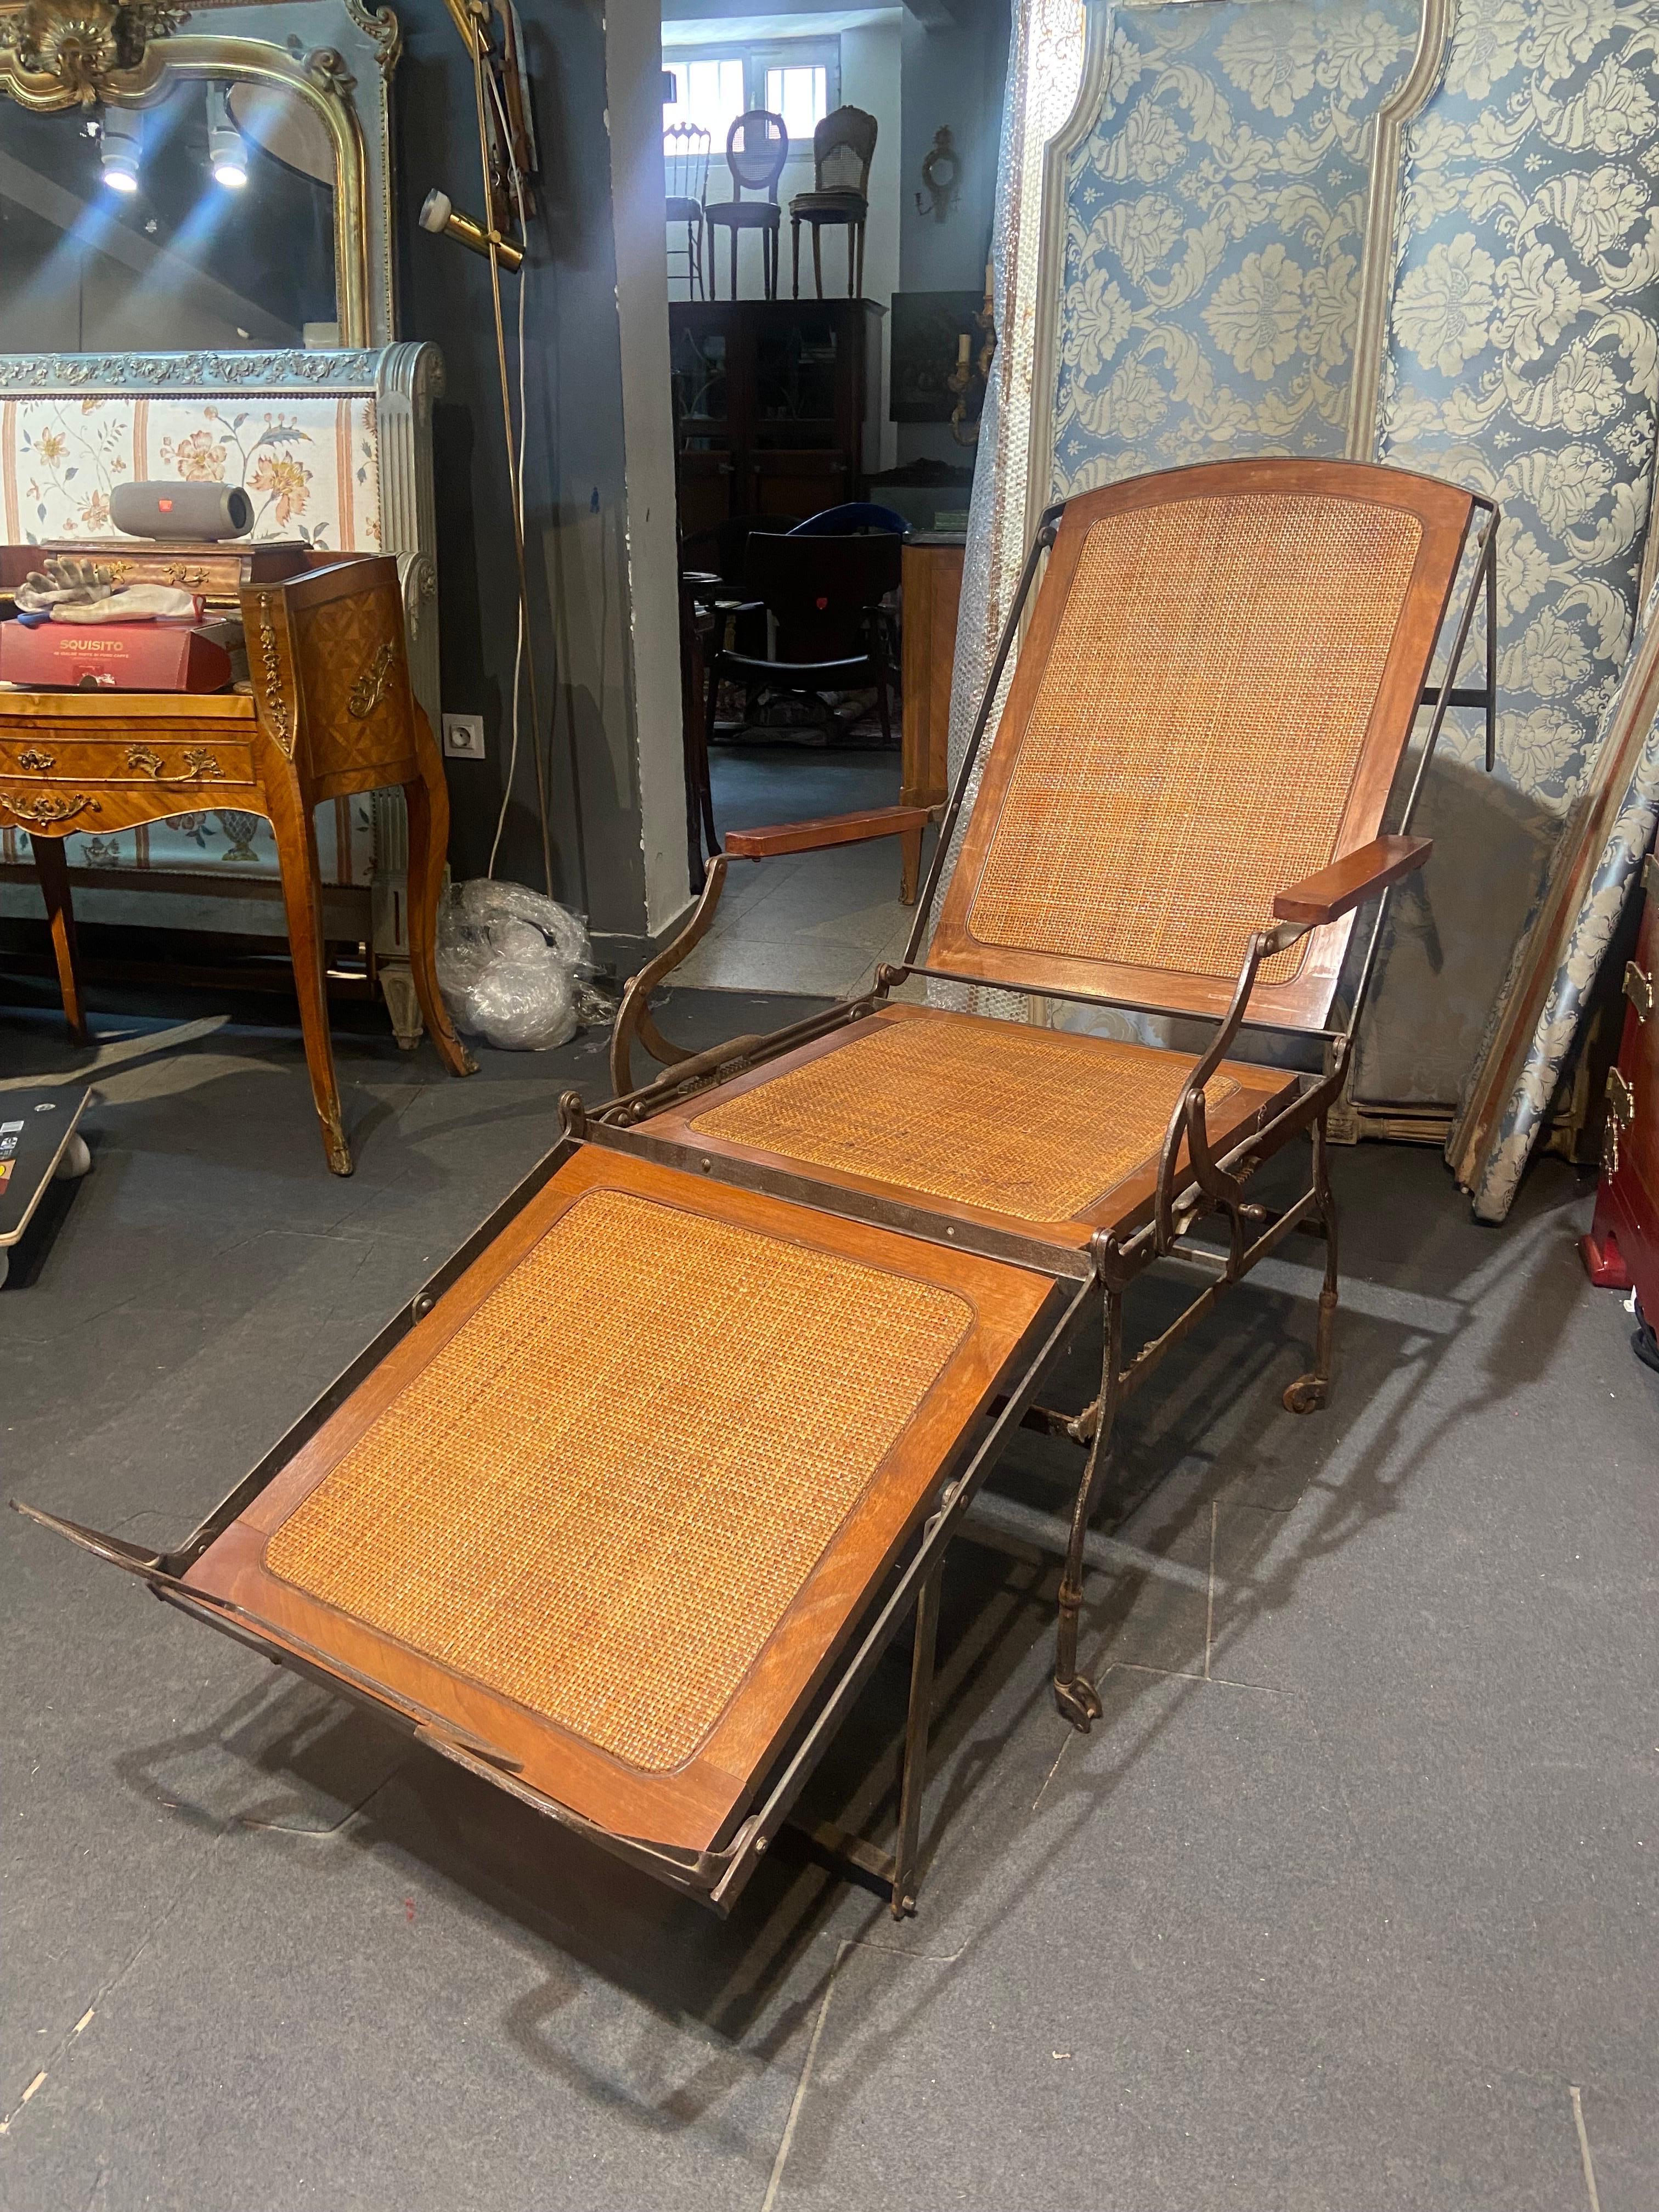 19th Century French wrought iron adjustable folding chaise lounge.
This beautiful antique metal campaign chaise can be positioned into three different positions - as a chair, a traditional chaise, and a flat daybed.
Authentic condition with no